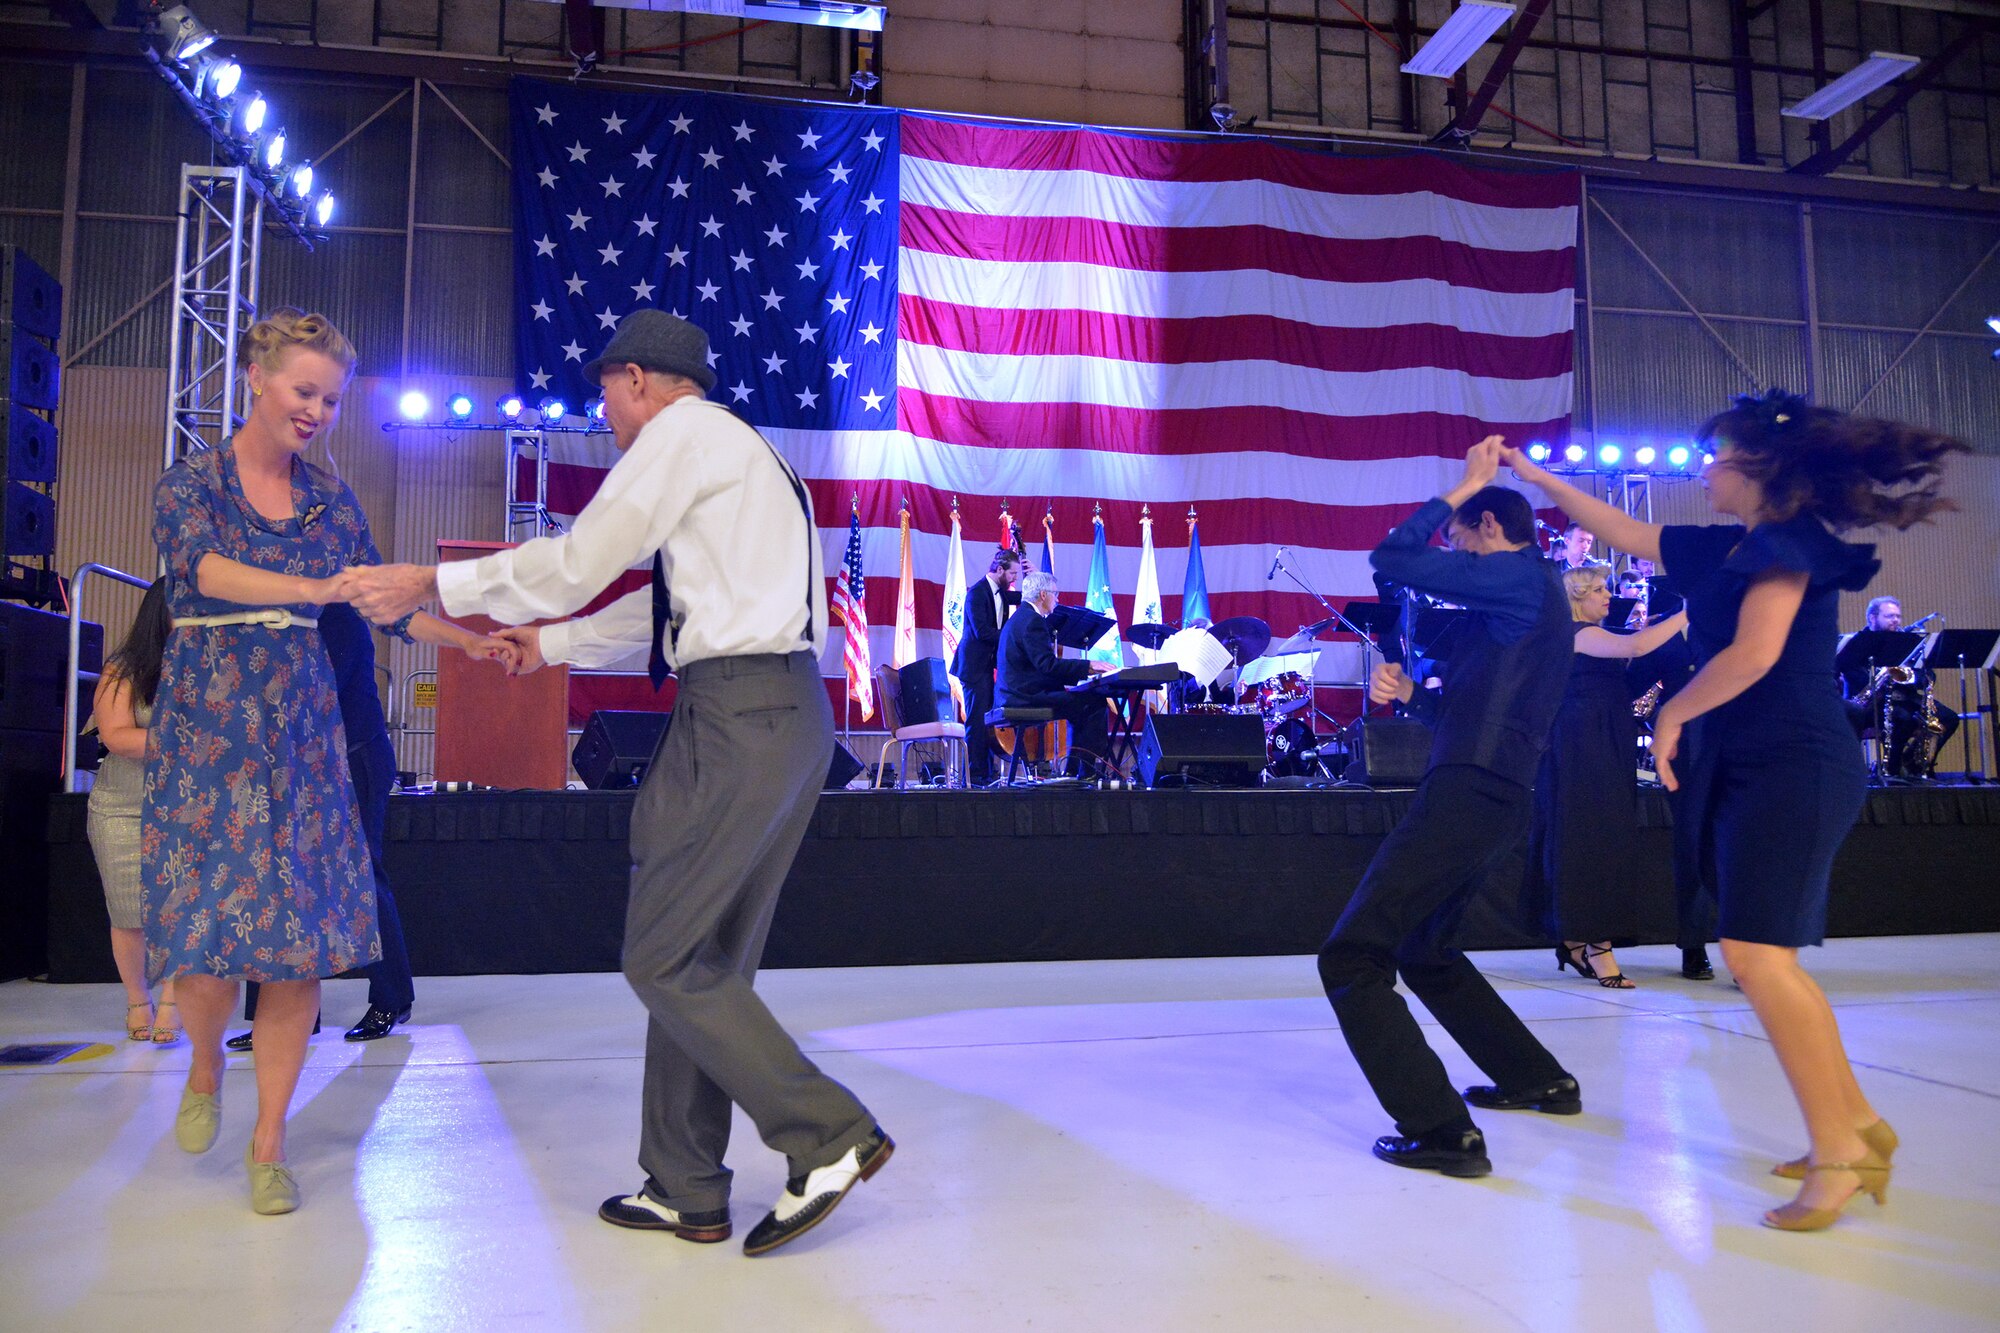 Couples take the dance floor at the 75th Anniversary banquet April 16. About 500 people attended the banquet at the New Mexico Air National Guard’s 150th Special Operations Wing hangar. The banquet had a 1940s theme, to remember the opening of Albuquerque Army Air Base on Jan. 7, 1941. Period attire and static displays of World War II vehicles helped bring the theme to life. (Photo by Todd Berenger)